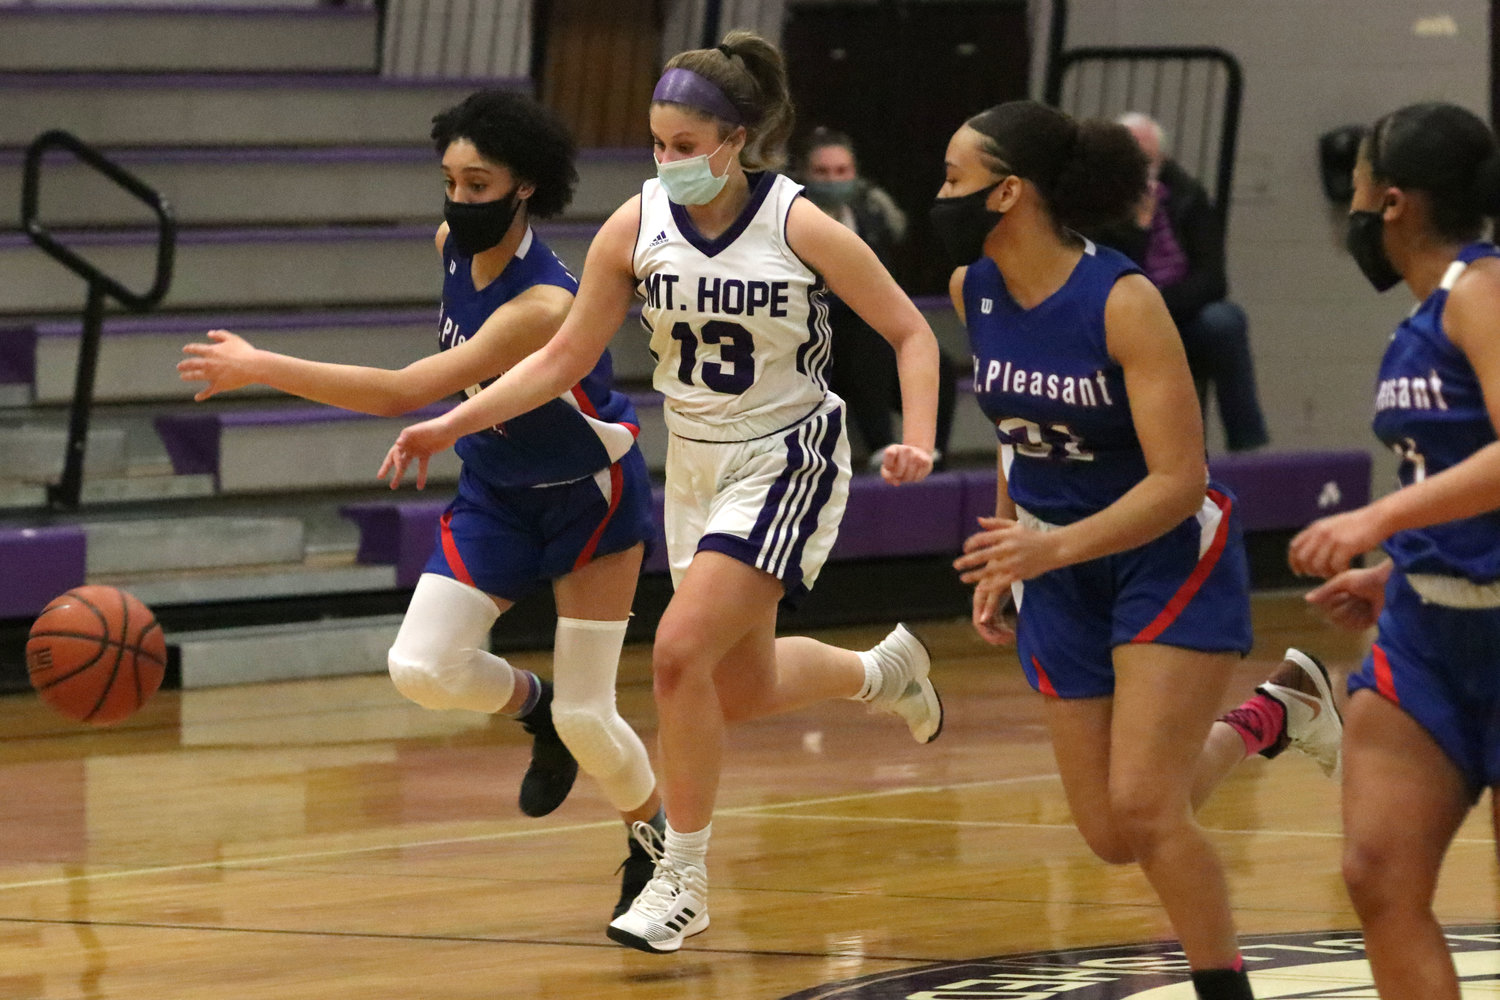 Point guard Abby Razzino dribbles up court after making a steal in the first quarter of their game against Mt. Pleasant on Thursday night. The sophomore scored 17 points in the victory.